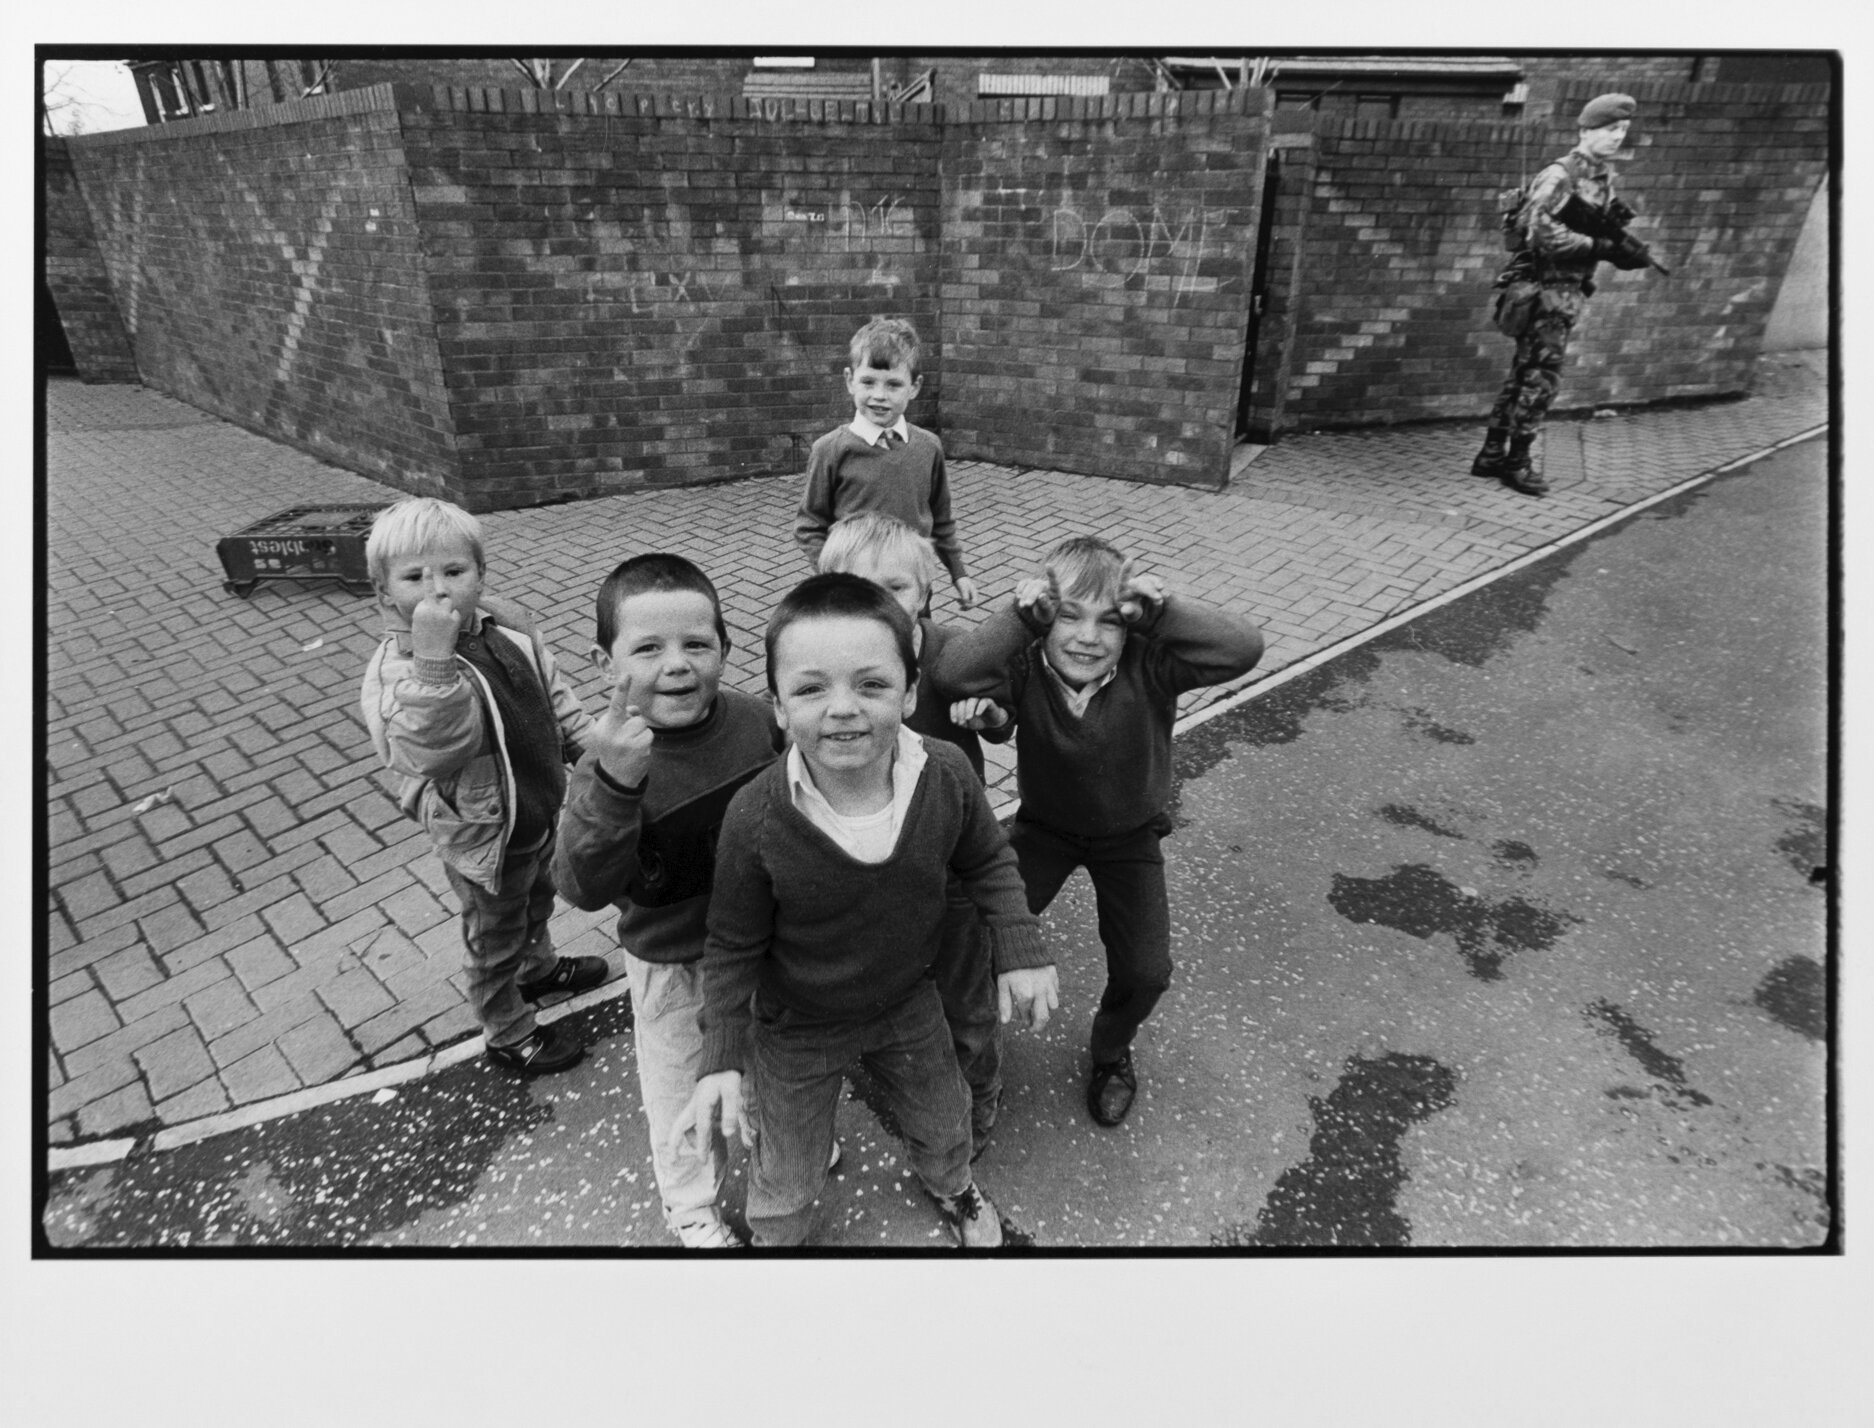  Catholic boys play while a British soldier stands in the background in Belfast, Northern Ireland. 1988 